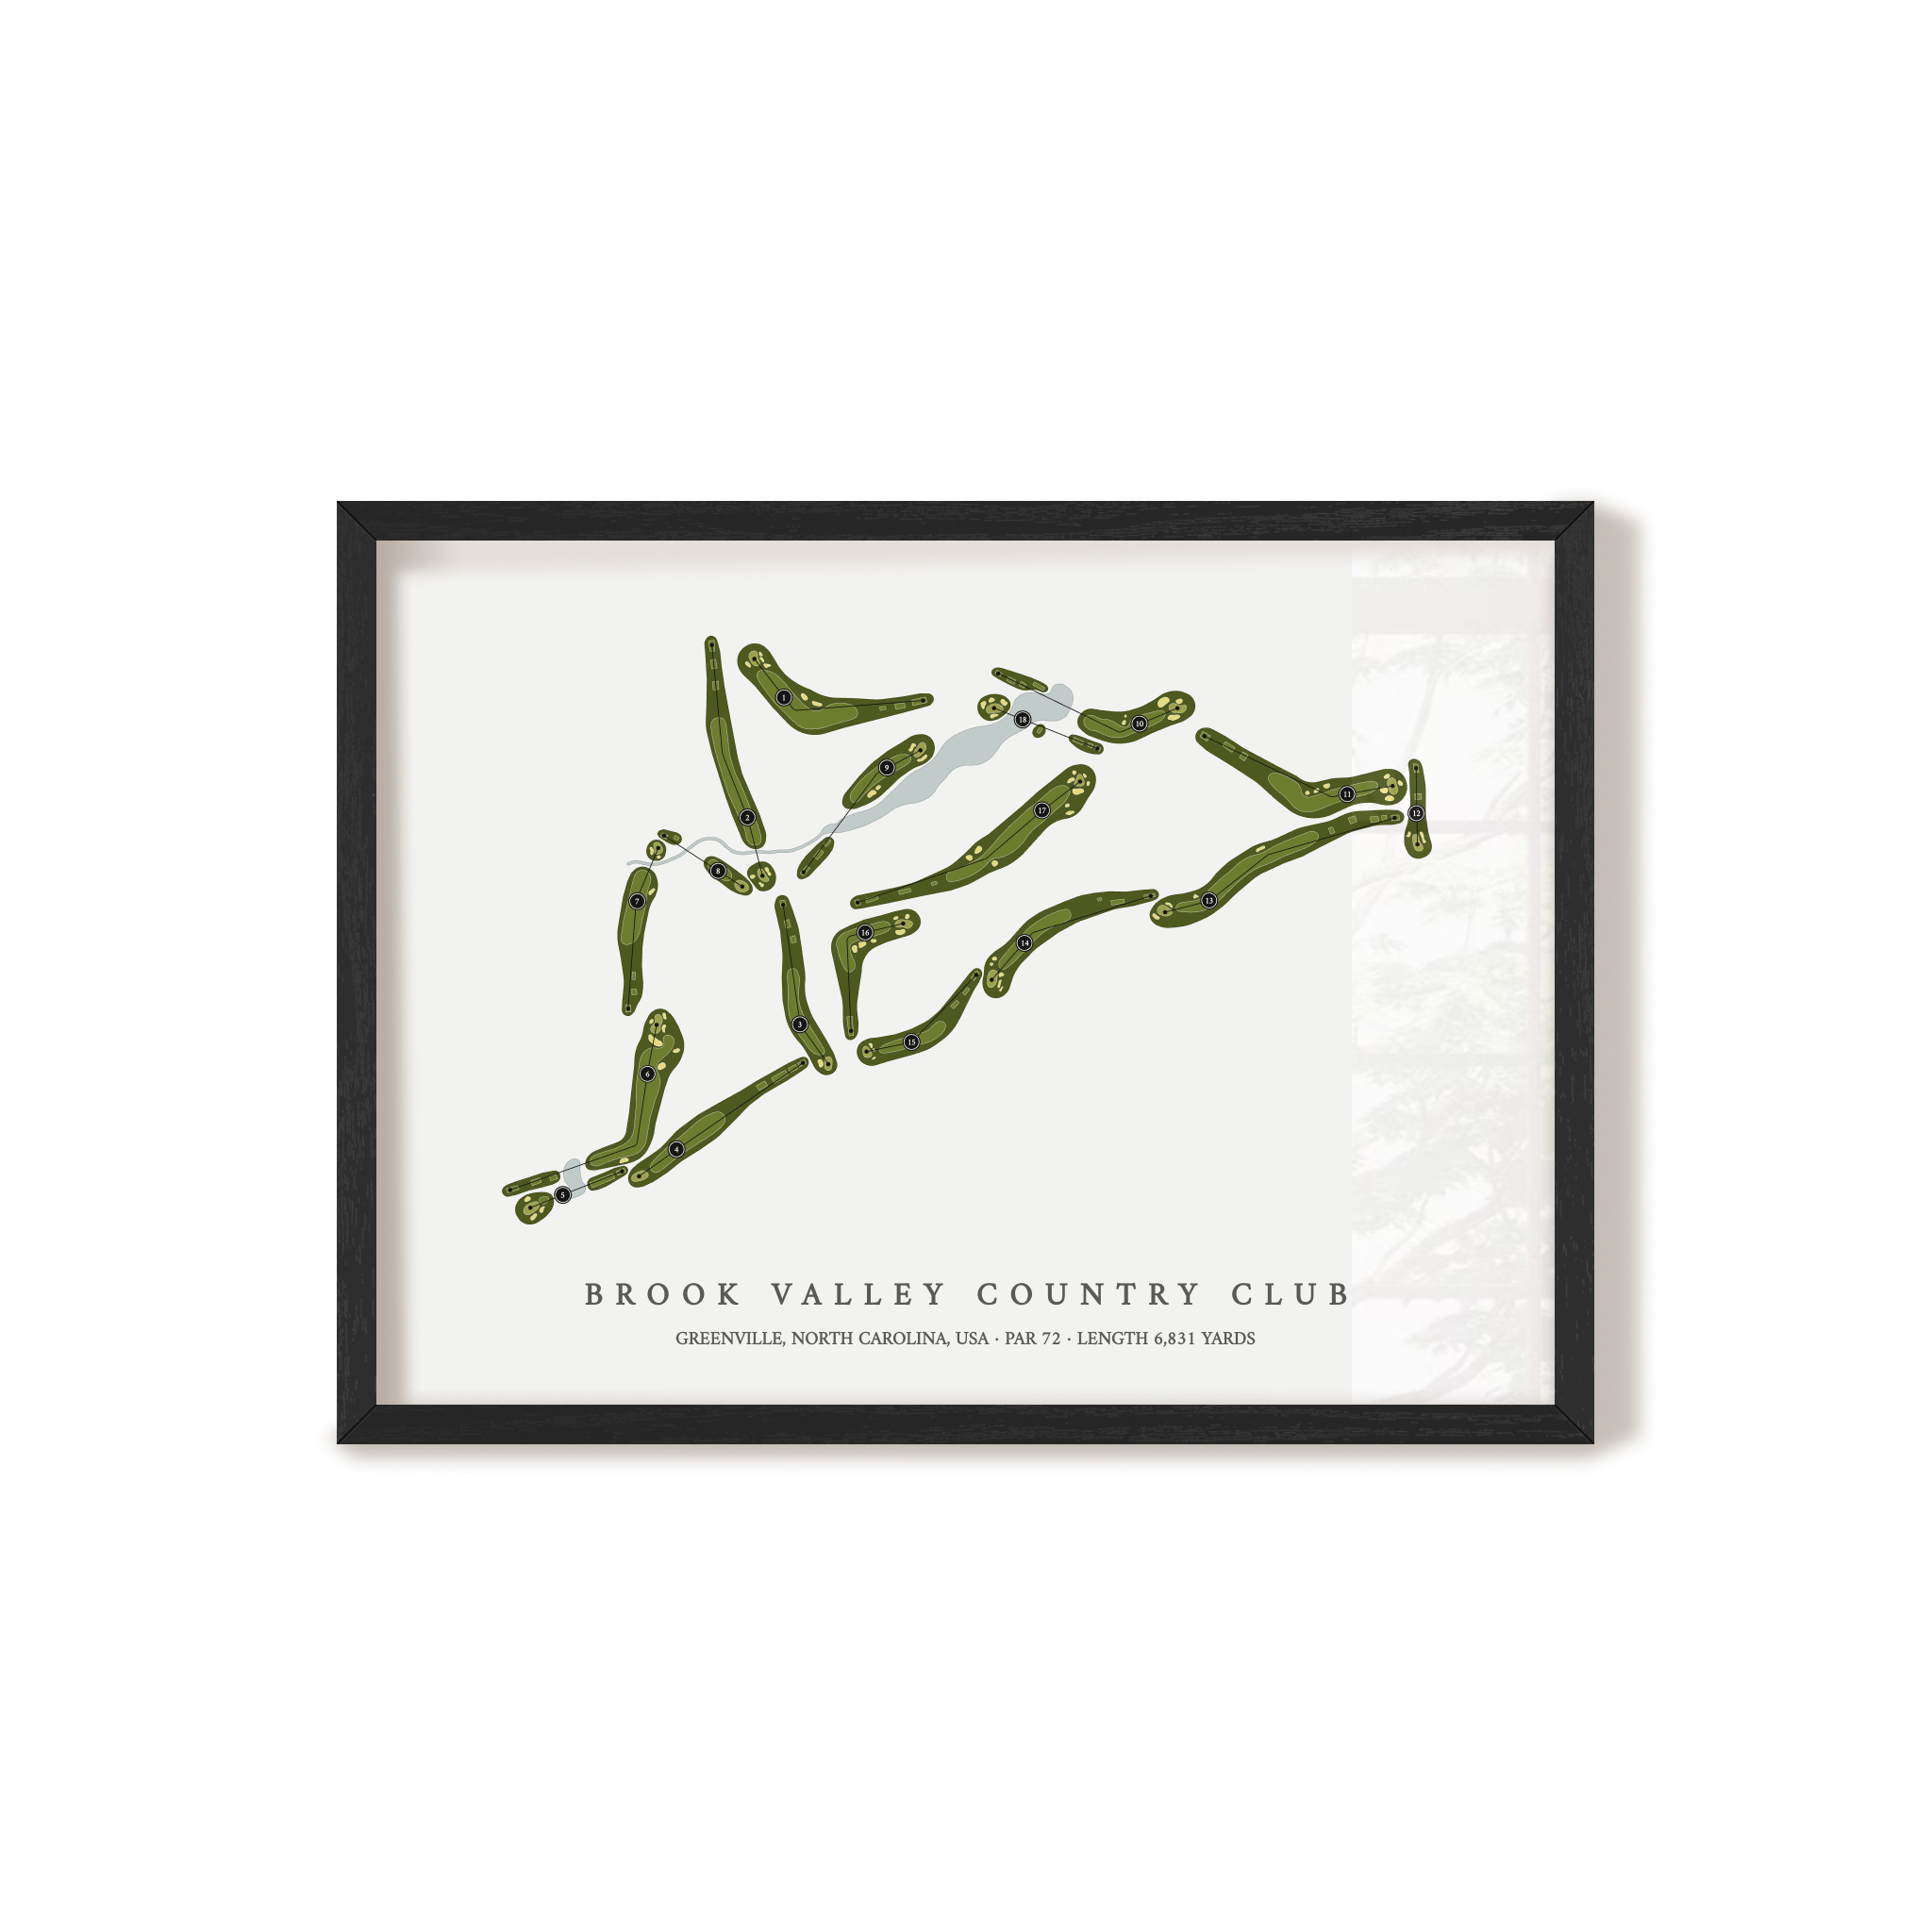 Brook Valley Country Club | Golf Course Map | Black Frame 